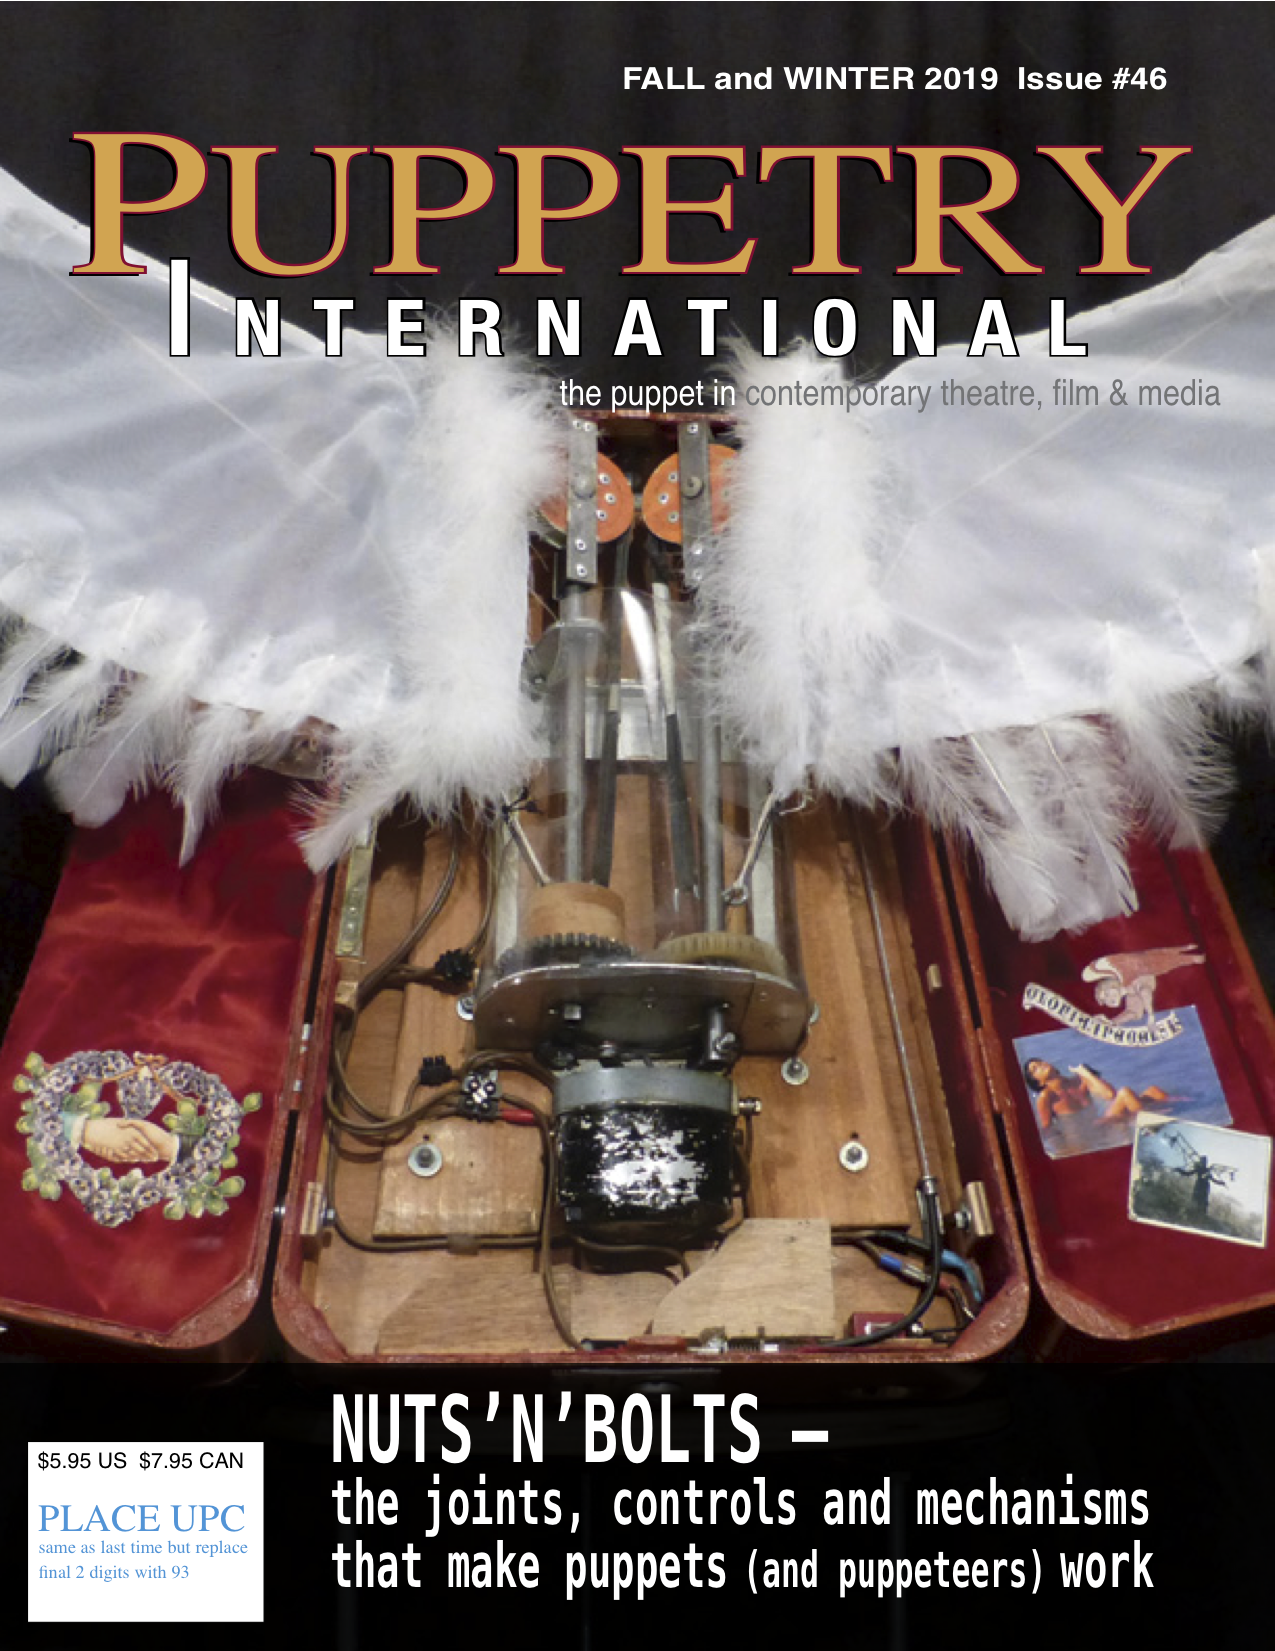 NUTS 'N' BOLTS 2019 • ISSUE NO. 46